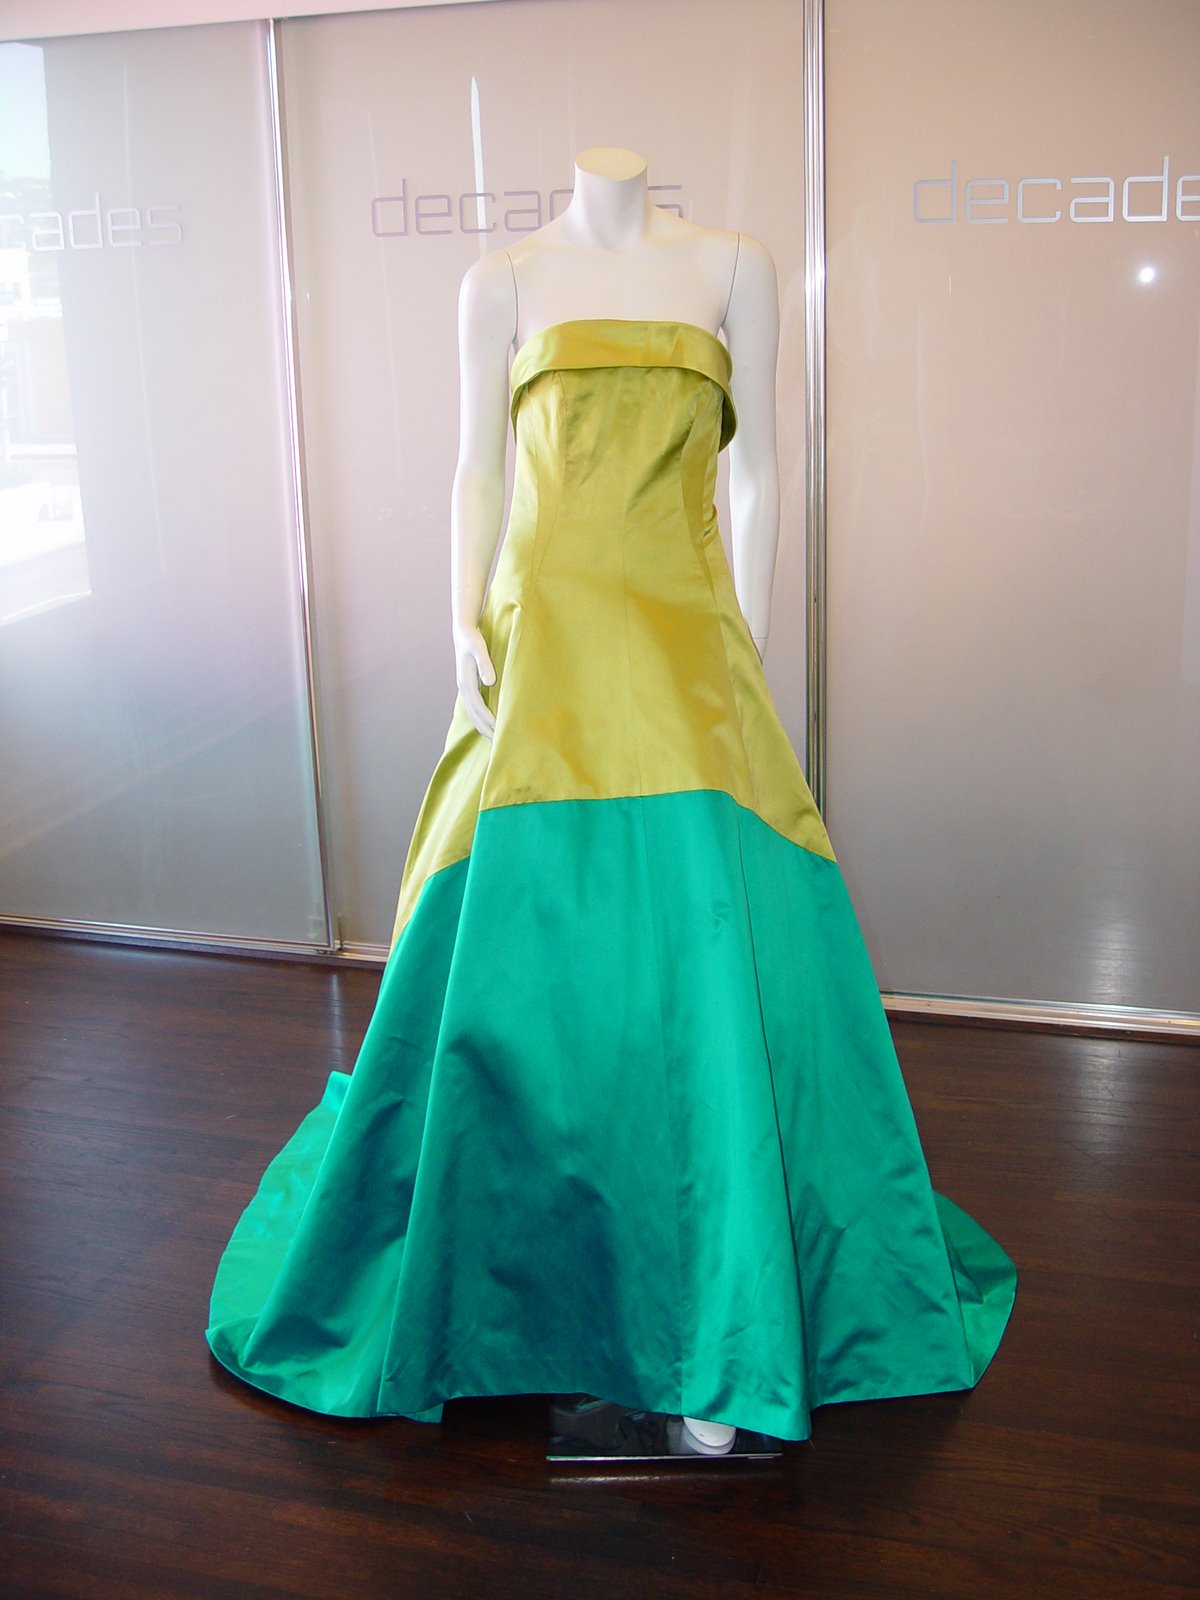 [JACQUES+FATH+80S+SILK+STRAPLESS+DRAMA+GOWN+IN+PUCE+AND+TURQUOISE.JPG.JPG]